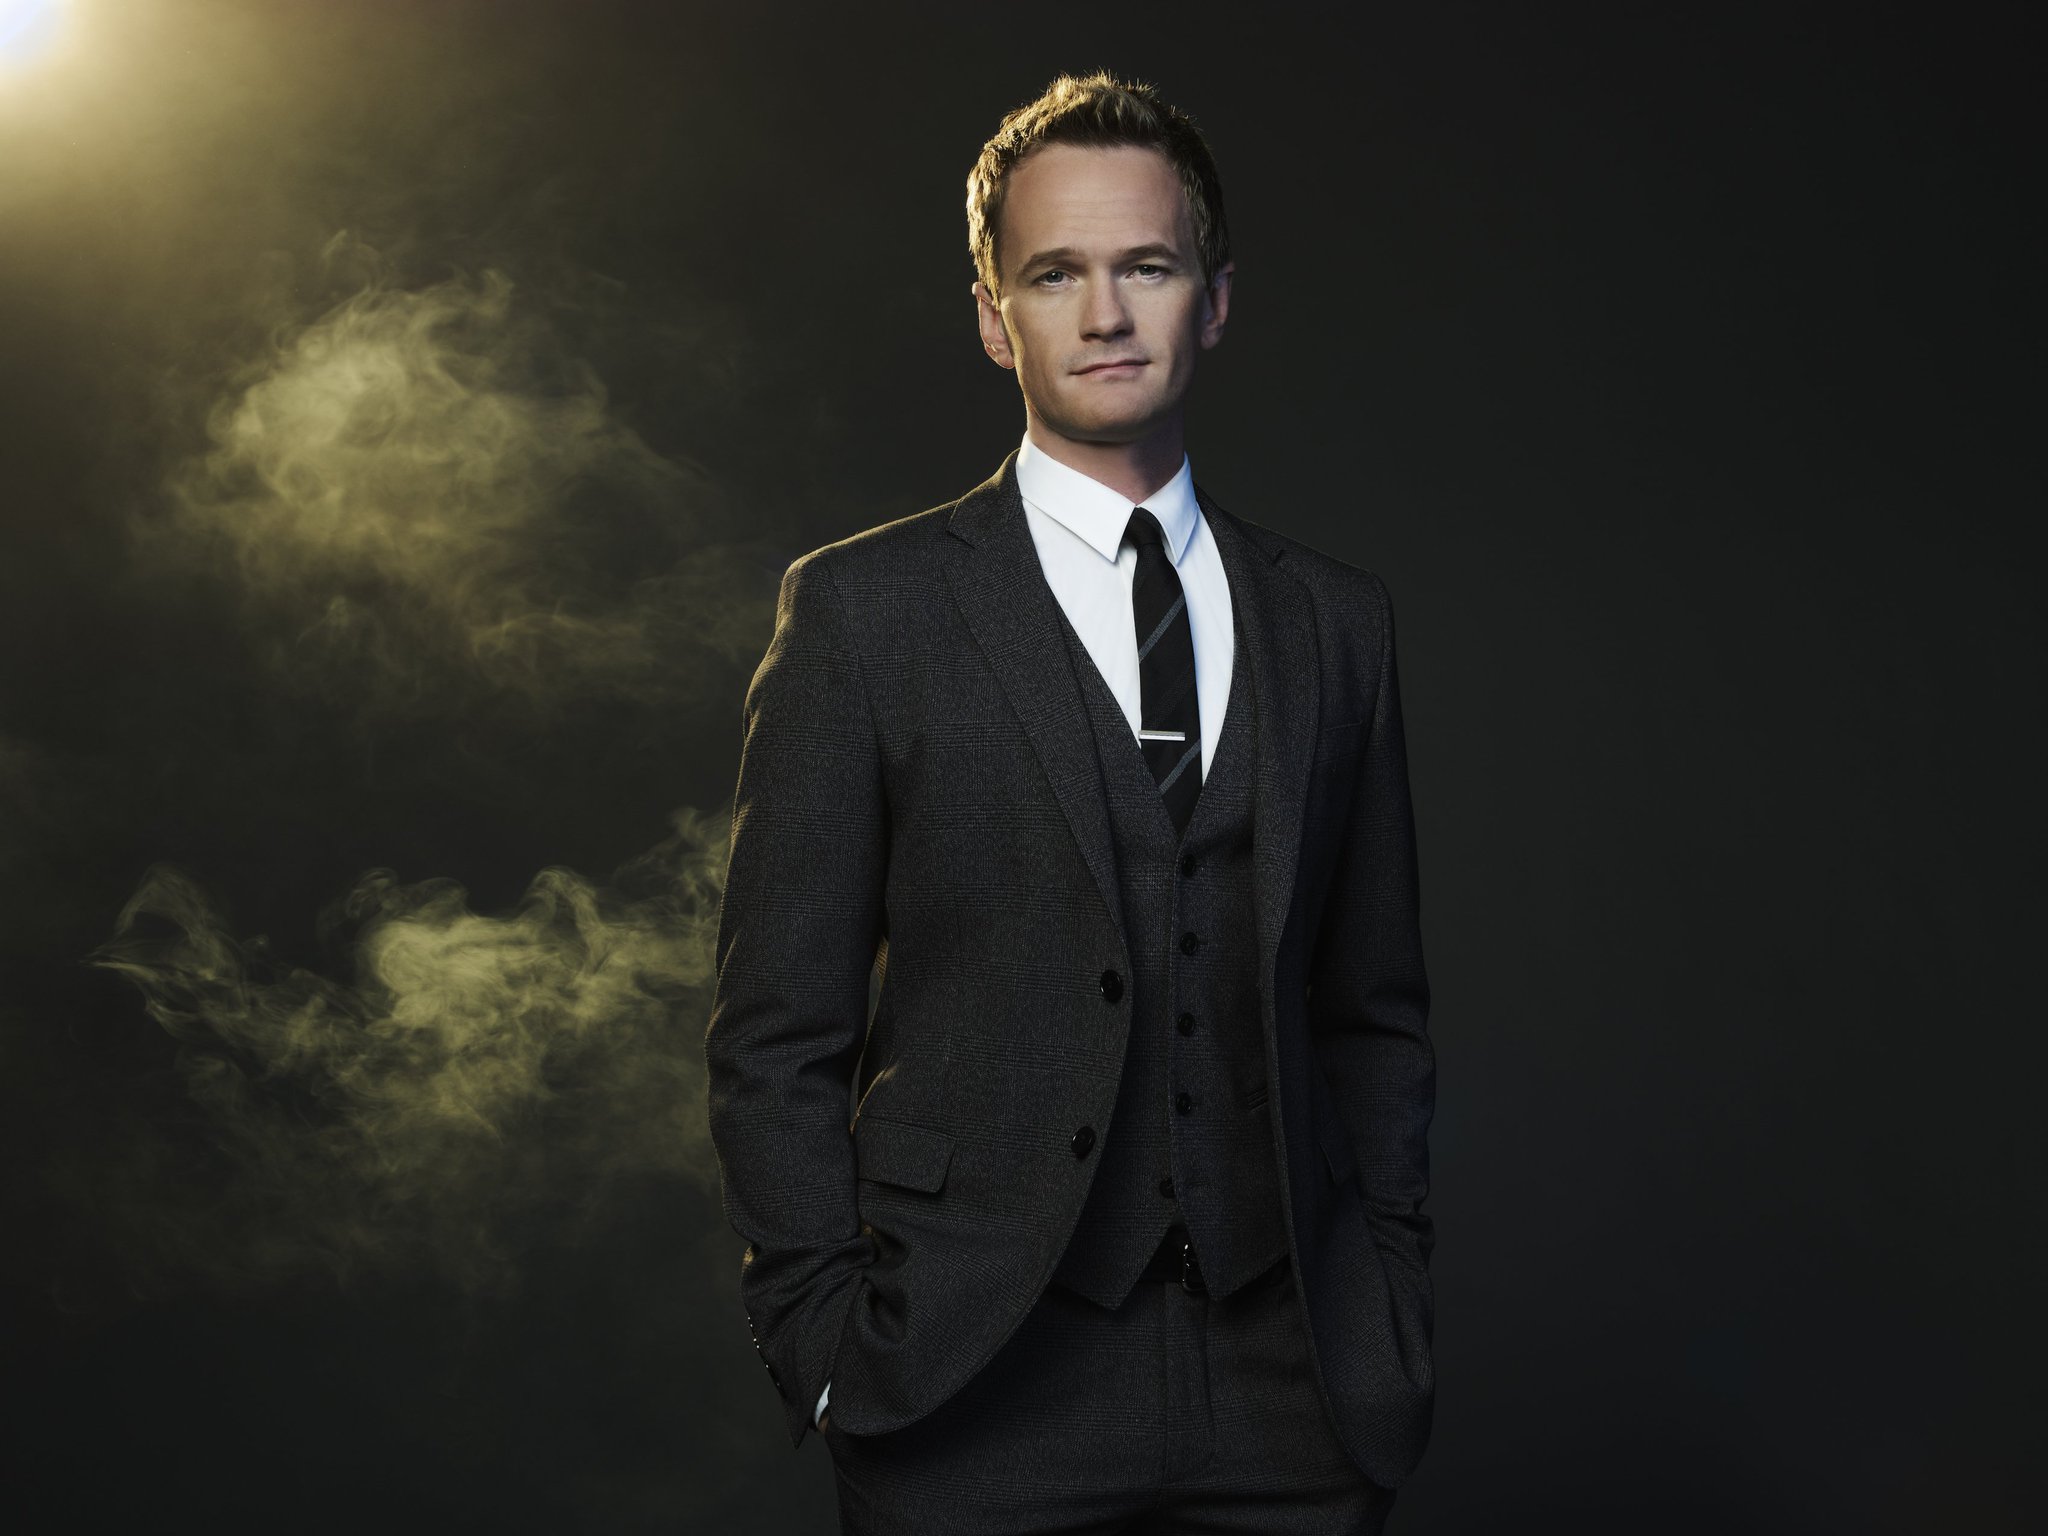 Let\s wish a BIG Happy Birthday to Neil Patrick Harris. Share your favorite Barney Stinson moment below! 